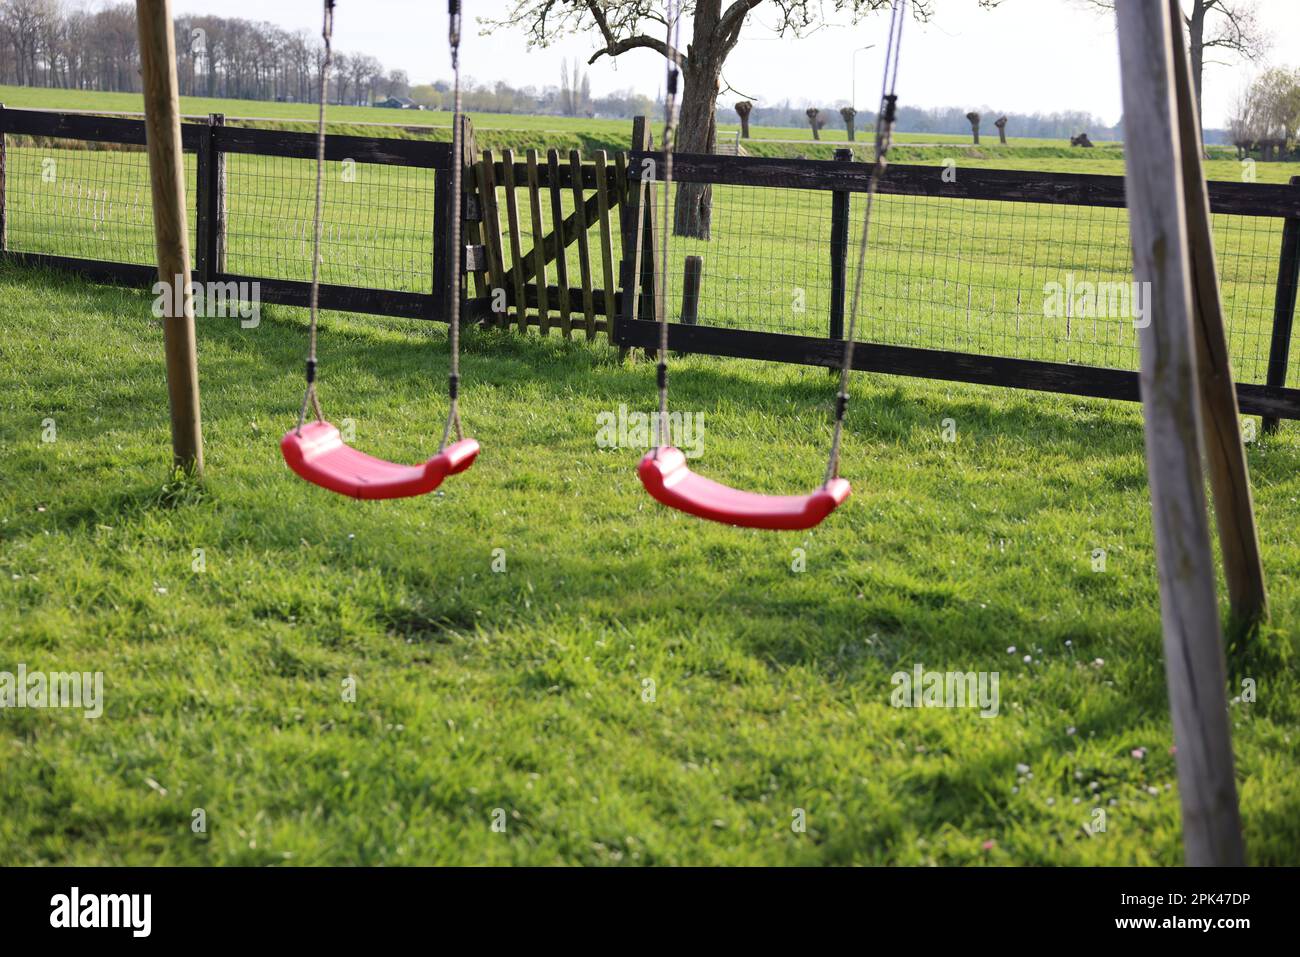 Outdoor swings on green grass near wooden fence outdoors Stock Photo